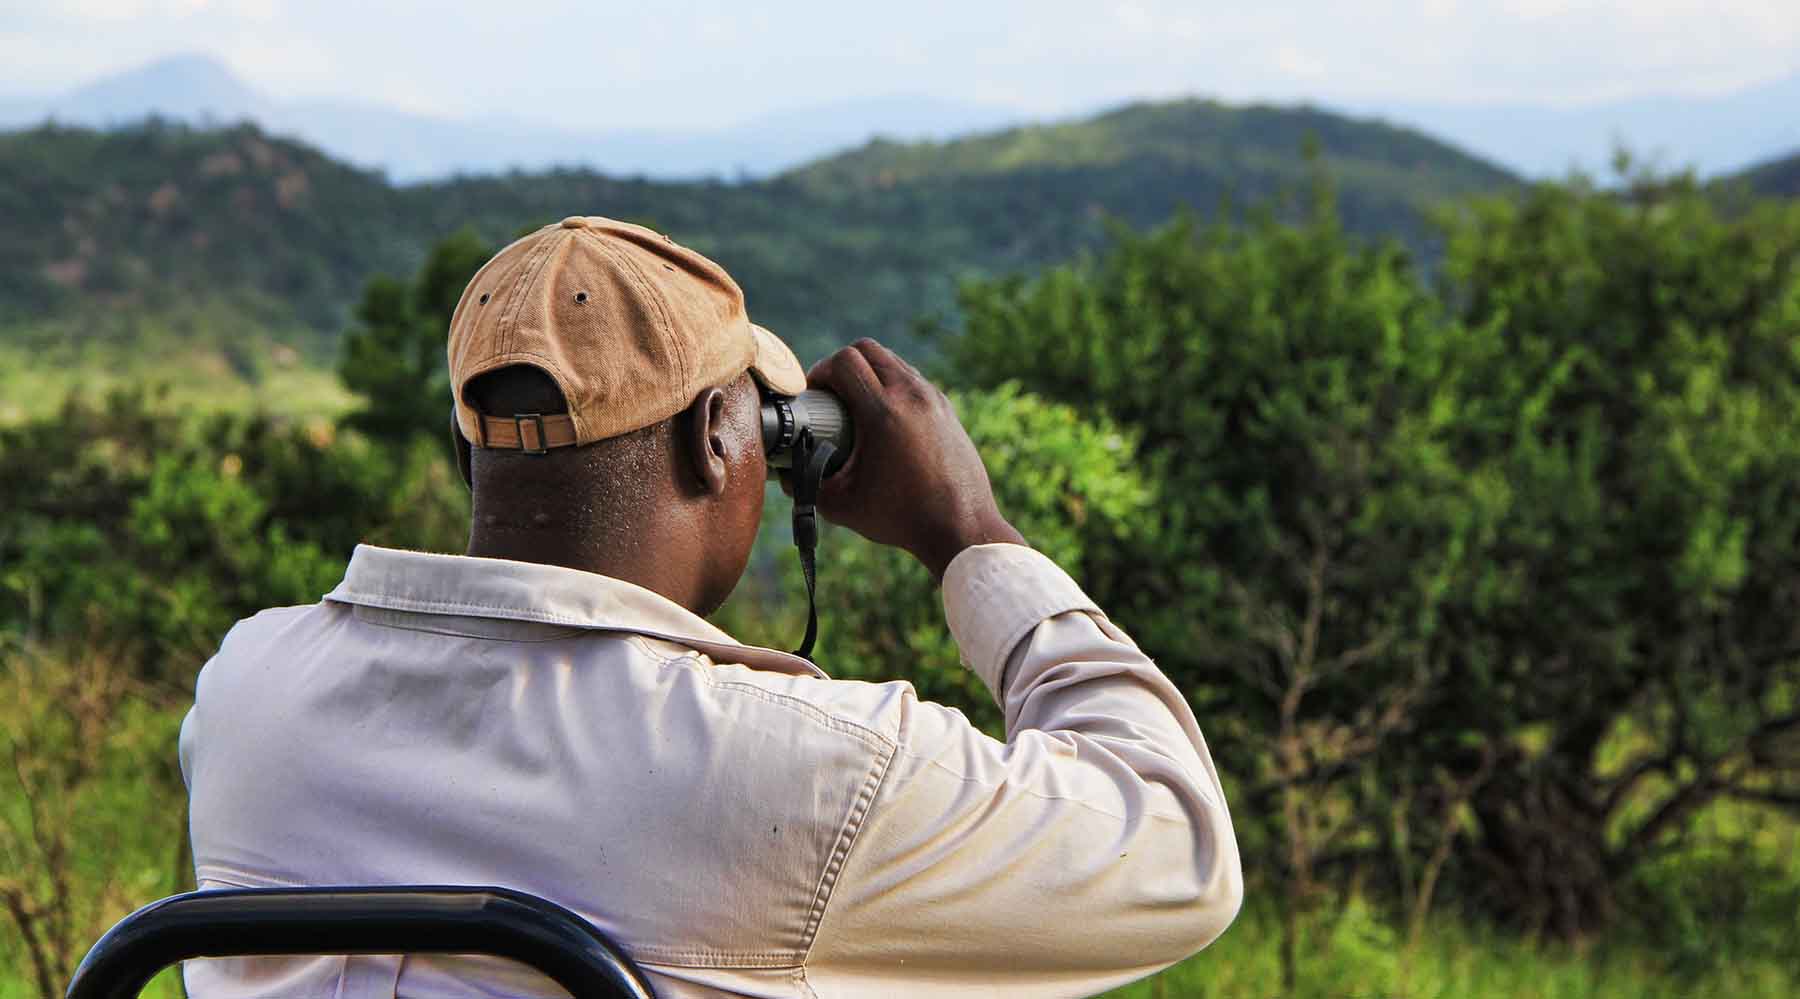 Man in a beige cap and white shirt using binoculars to observe wildlife, with a lush green landscape and mountain range in the background